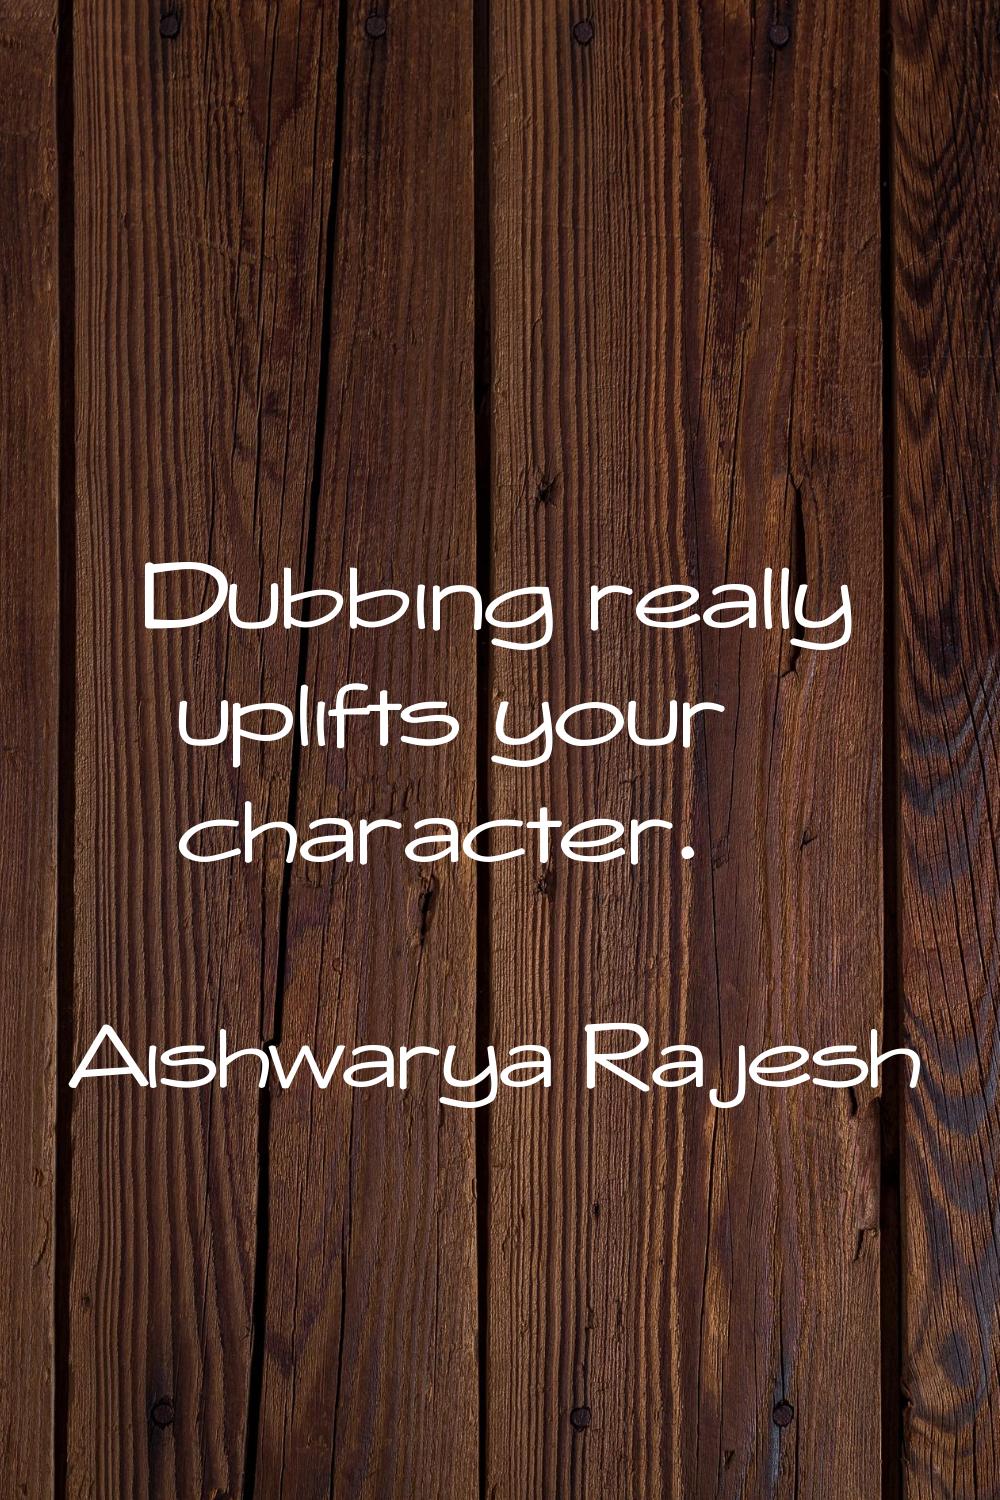 Dubbing really uplifts your character.